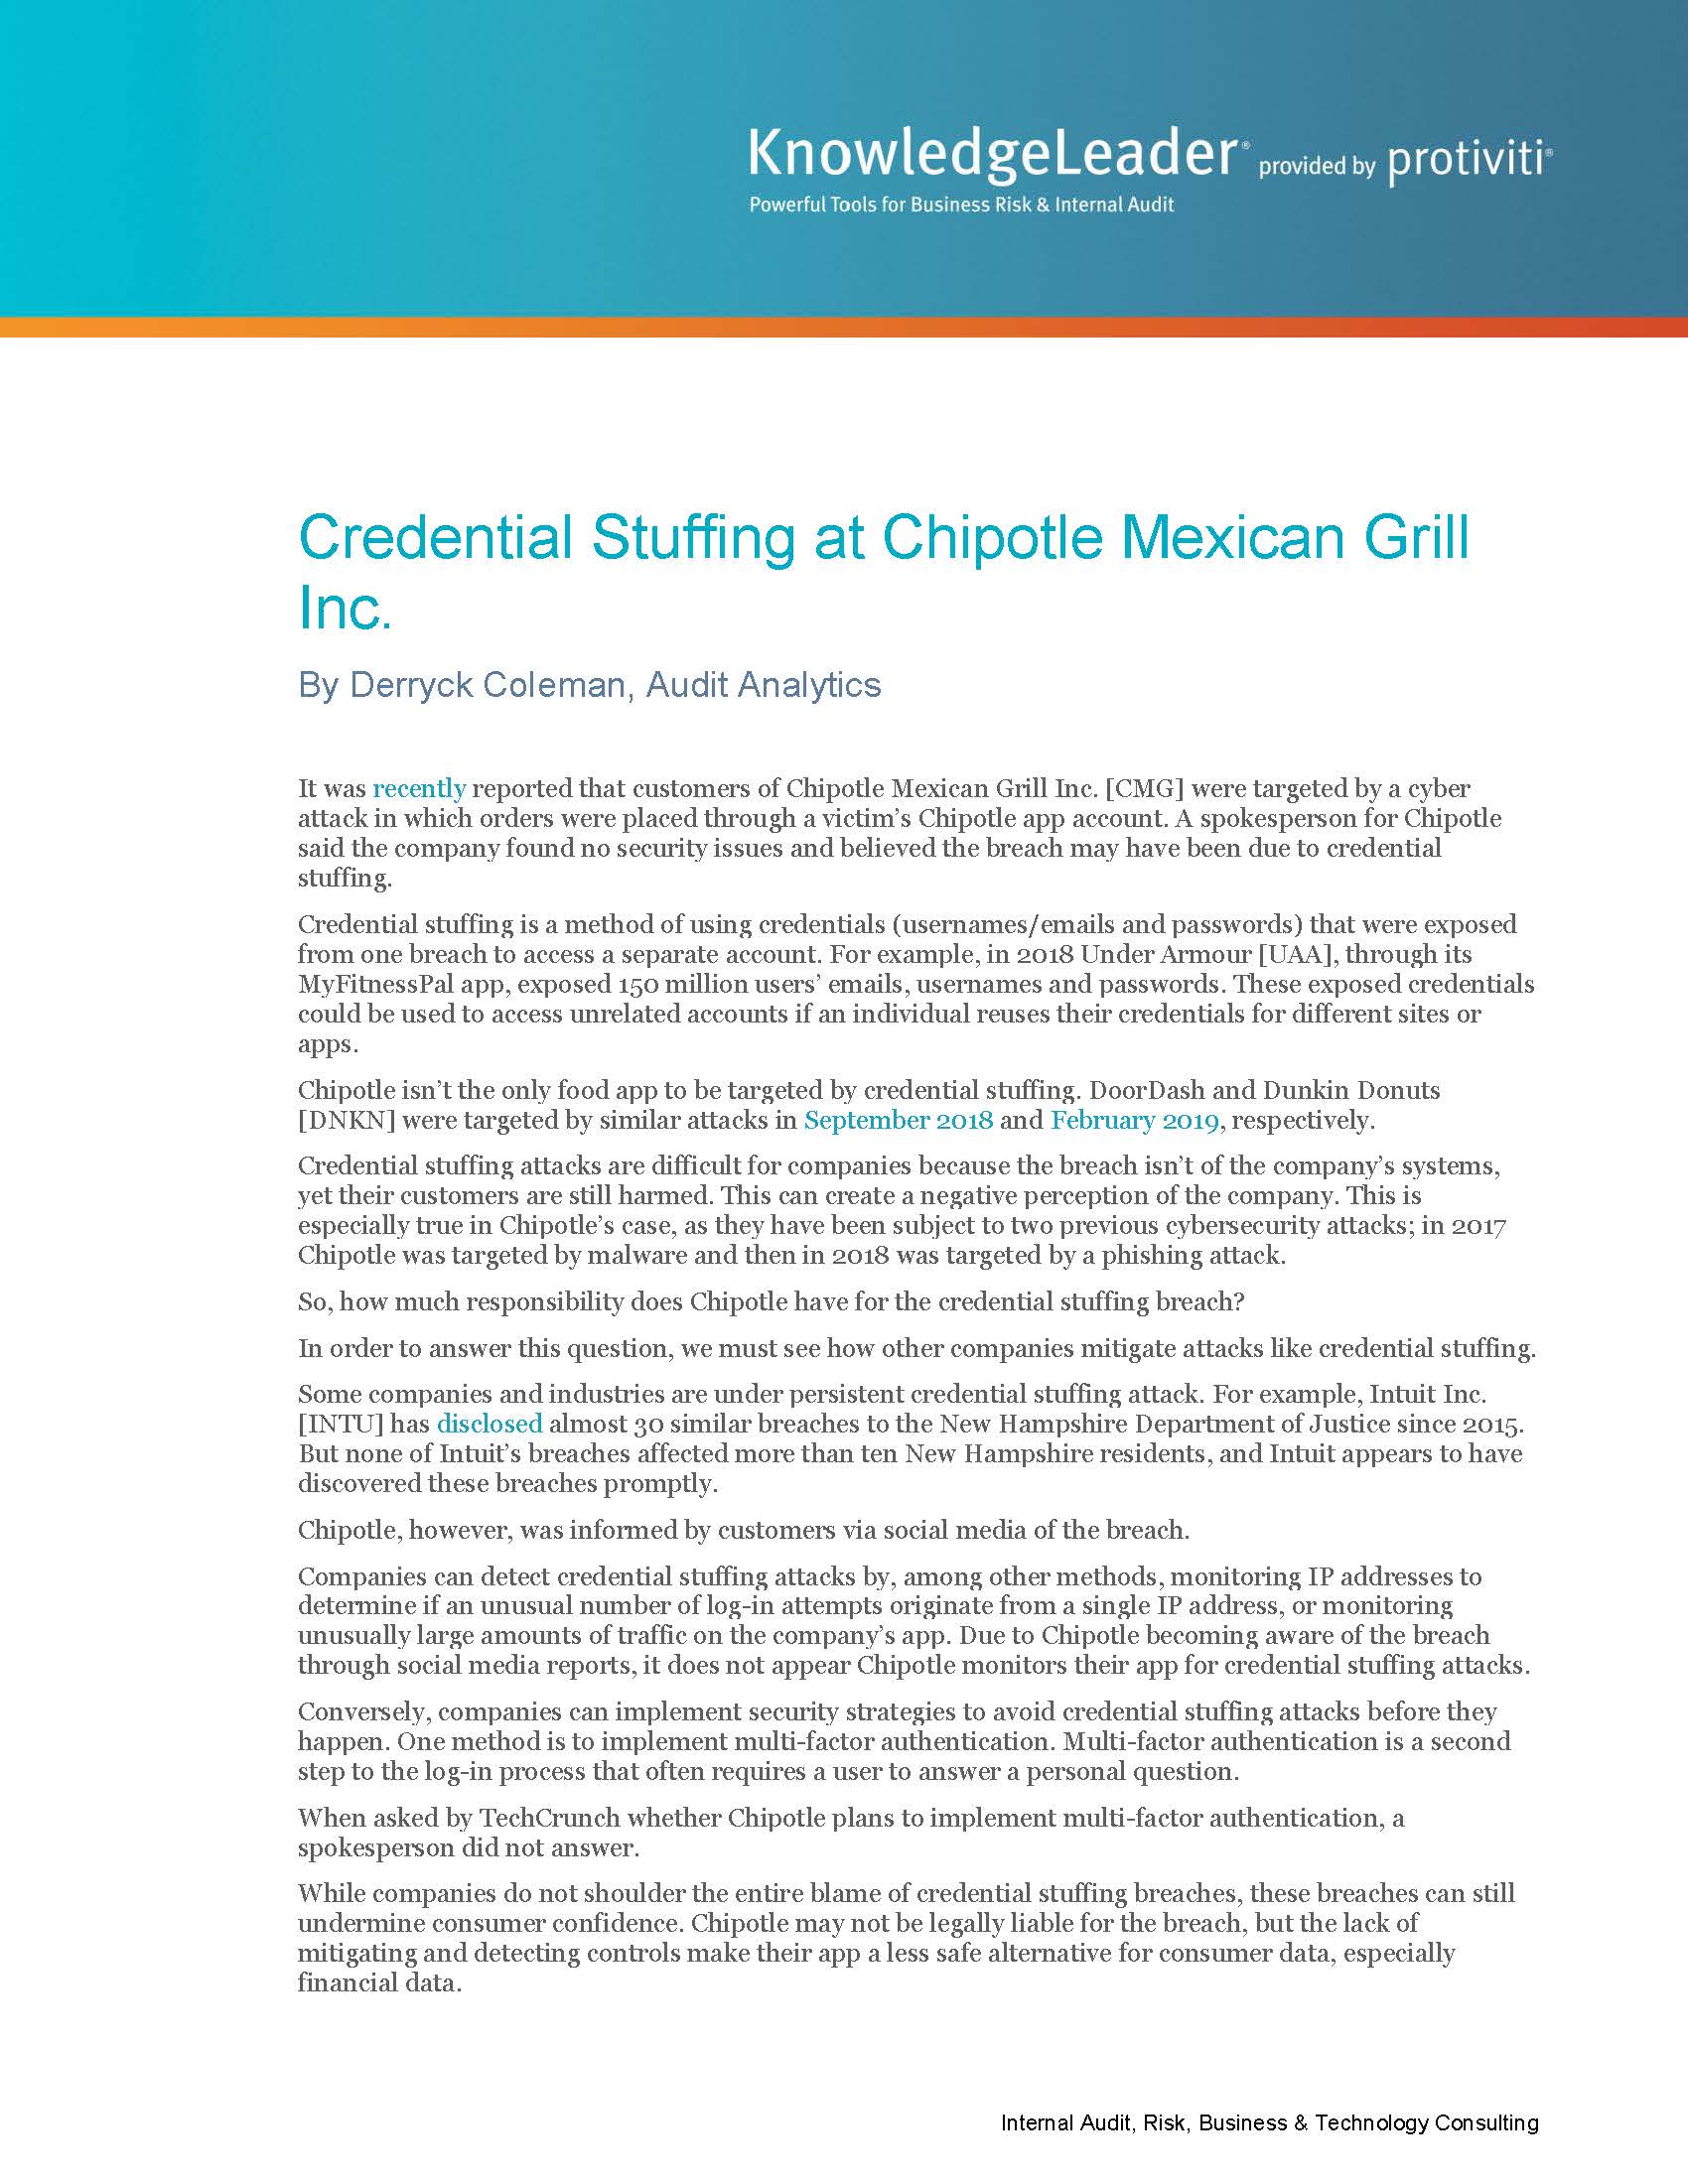 Screenshot of the first page of Credential Stuffing at Chipotle Mexican Grill Inc.